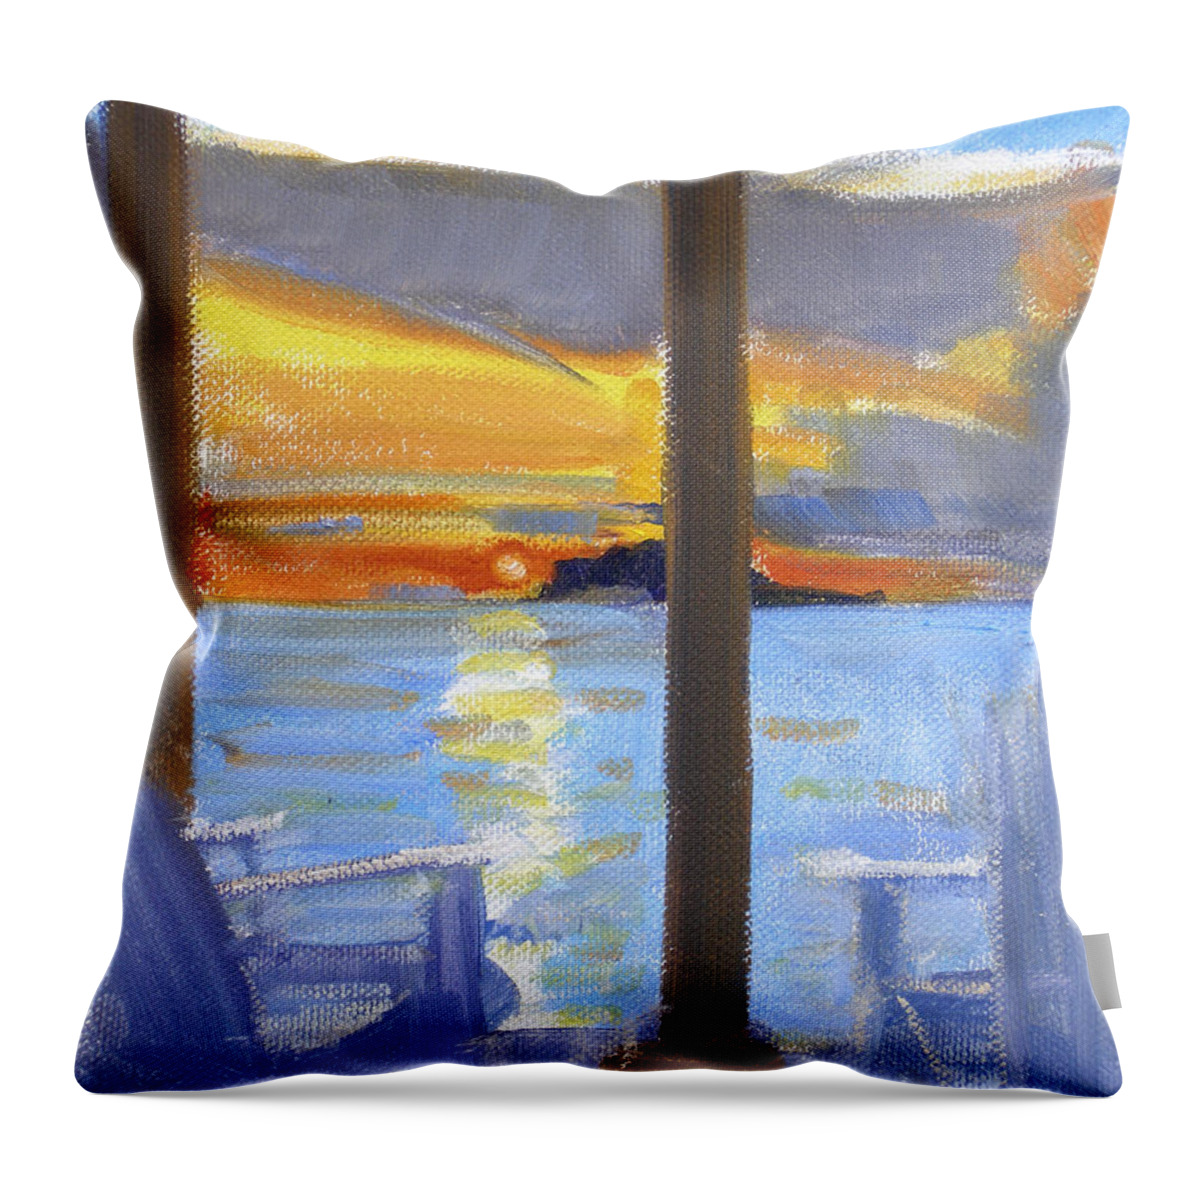 Terrace Sunset Throw Pillow featuring the painting Terrace Sunset by Candace Lovely